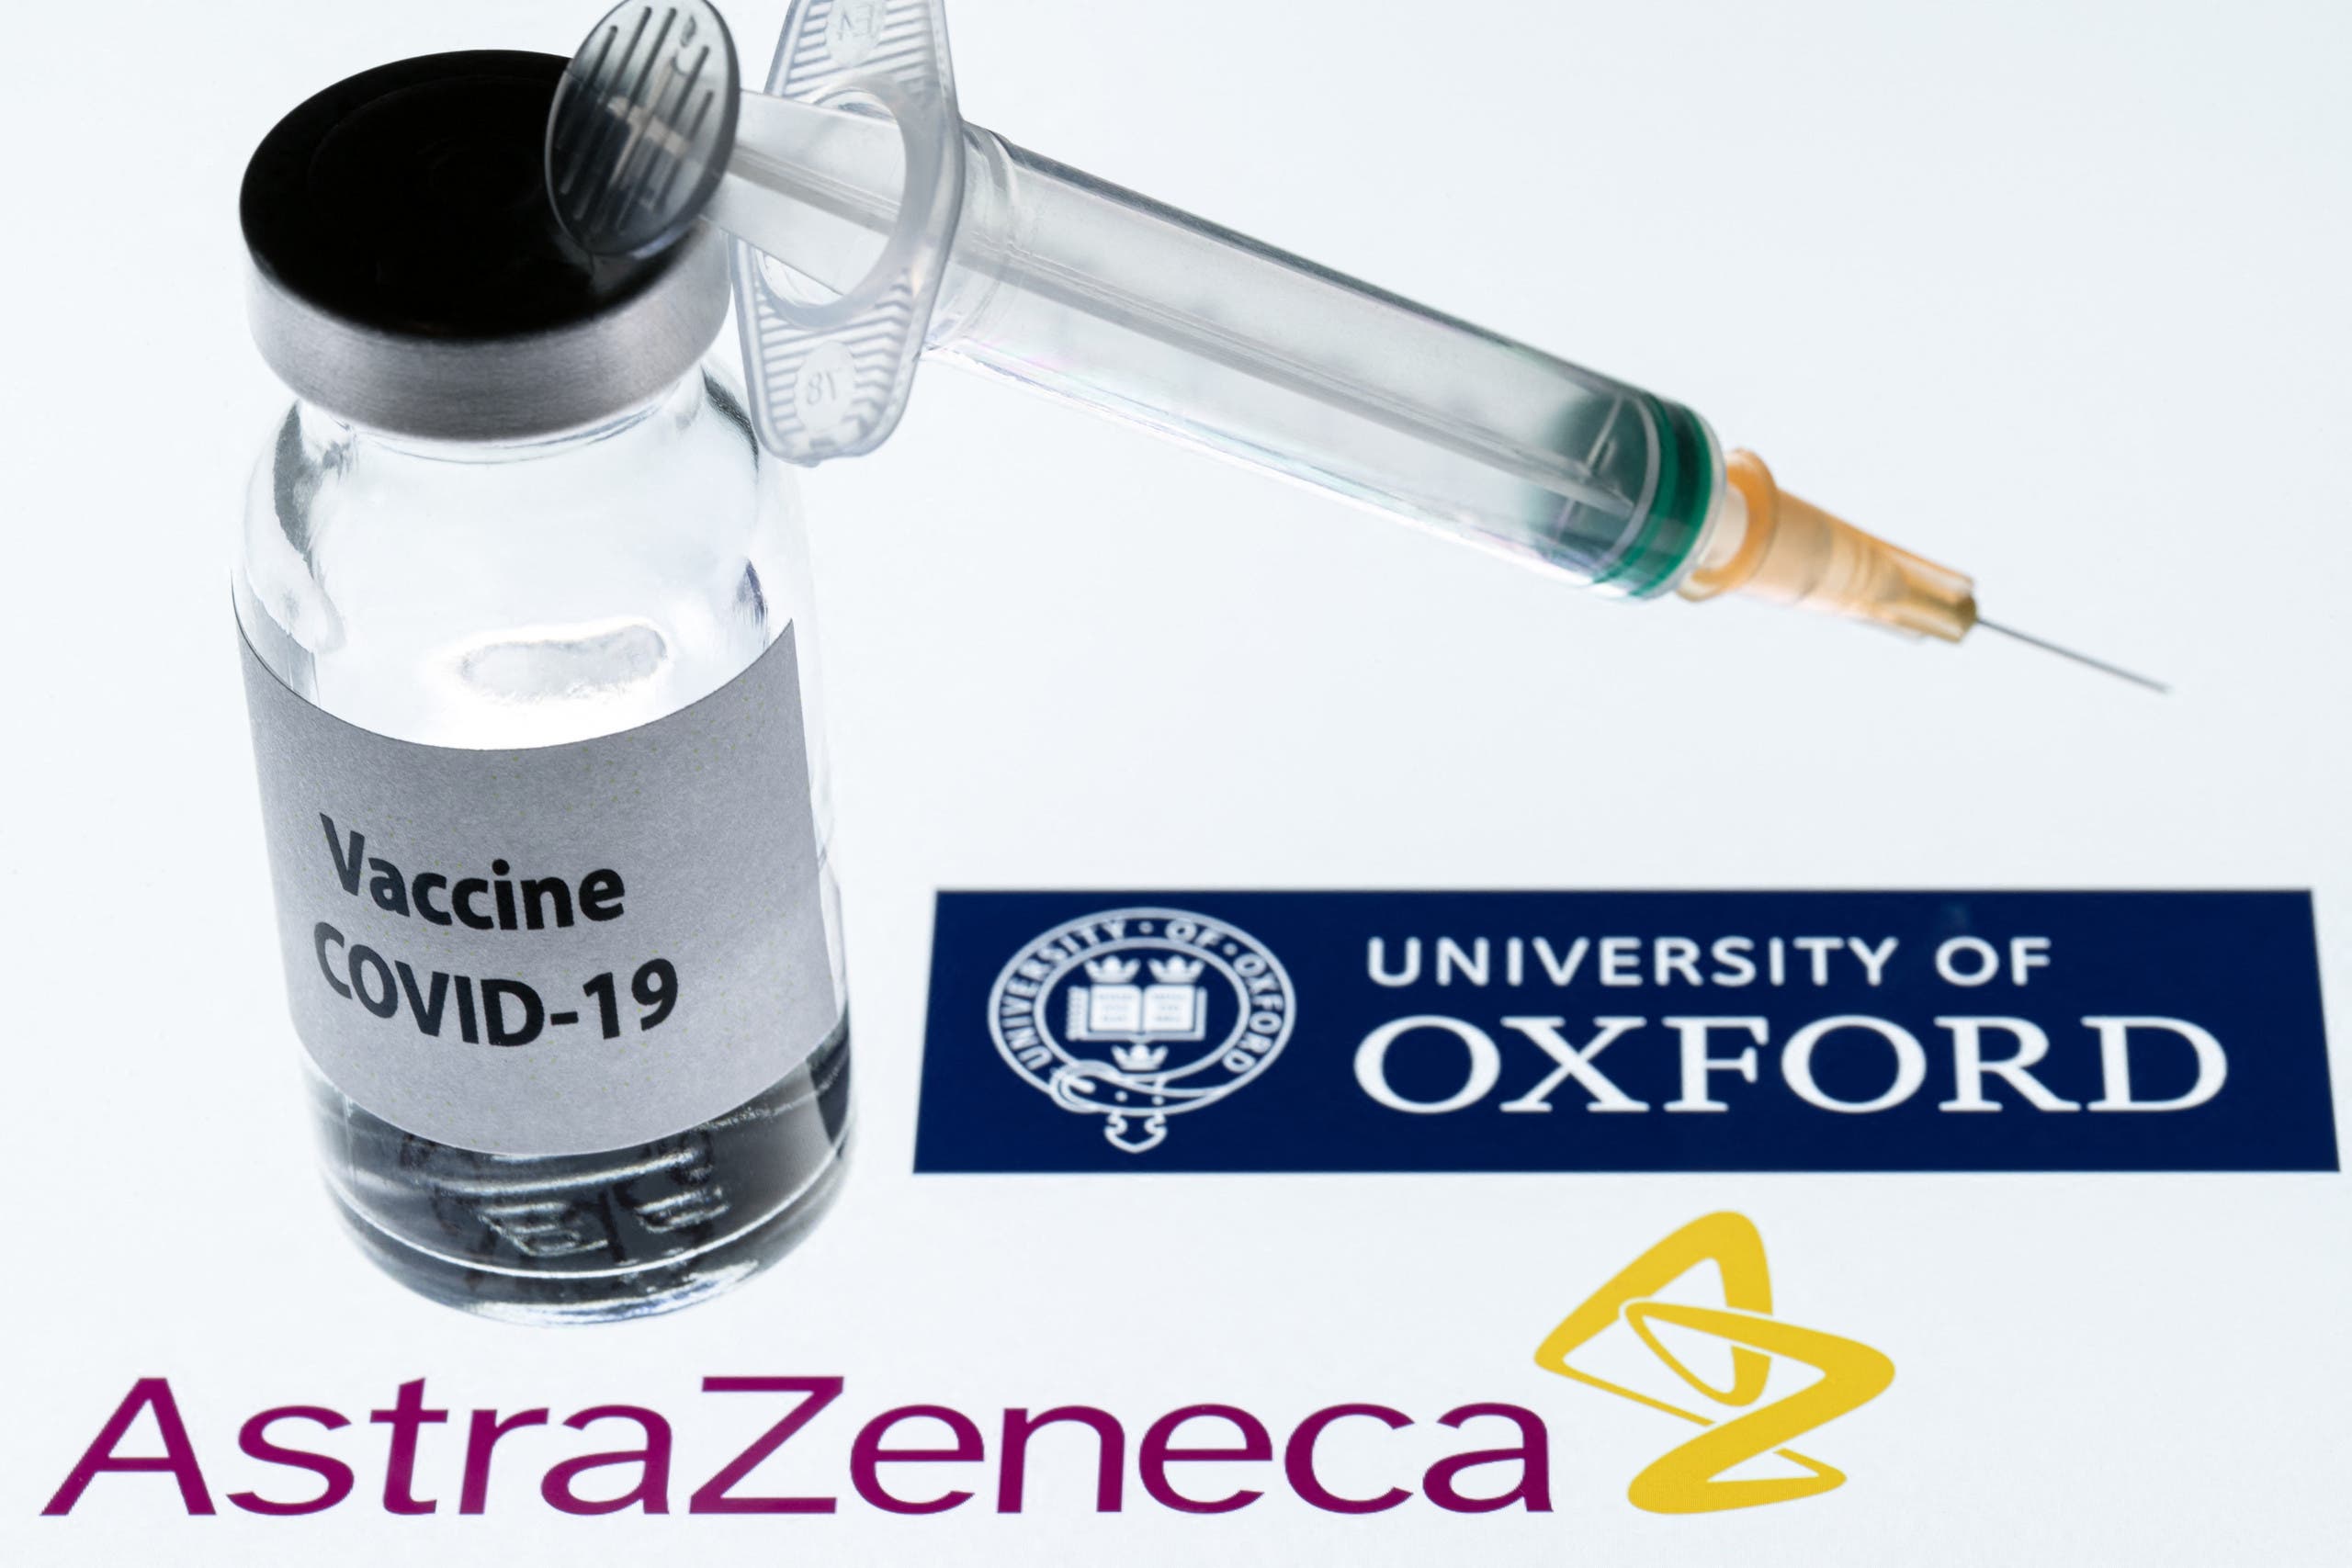 In this file photo taken on November 23, 2020 shows an illustration picture of a syringe and a bottle reading Covid-19 Vaccine next to AstraZeneca company and University of Oxford logos. (File photo: AFP)